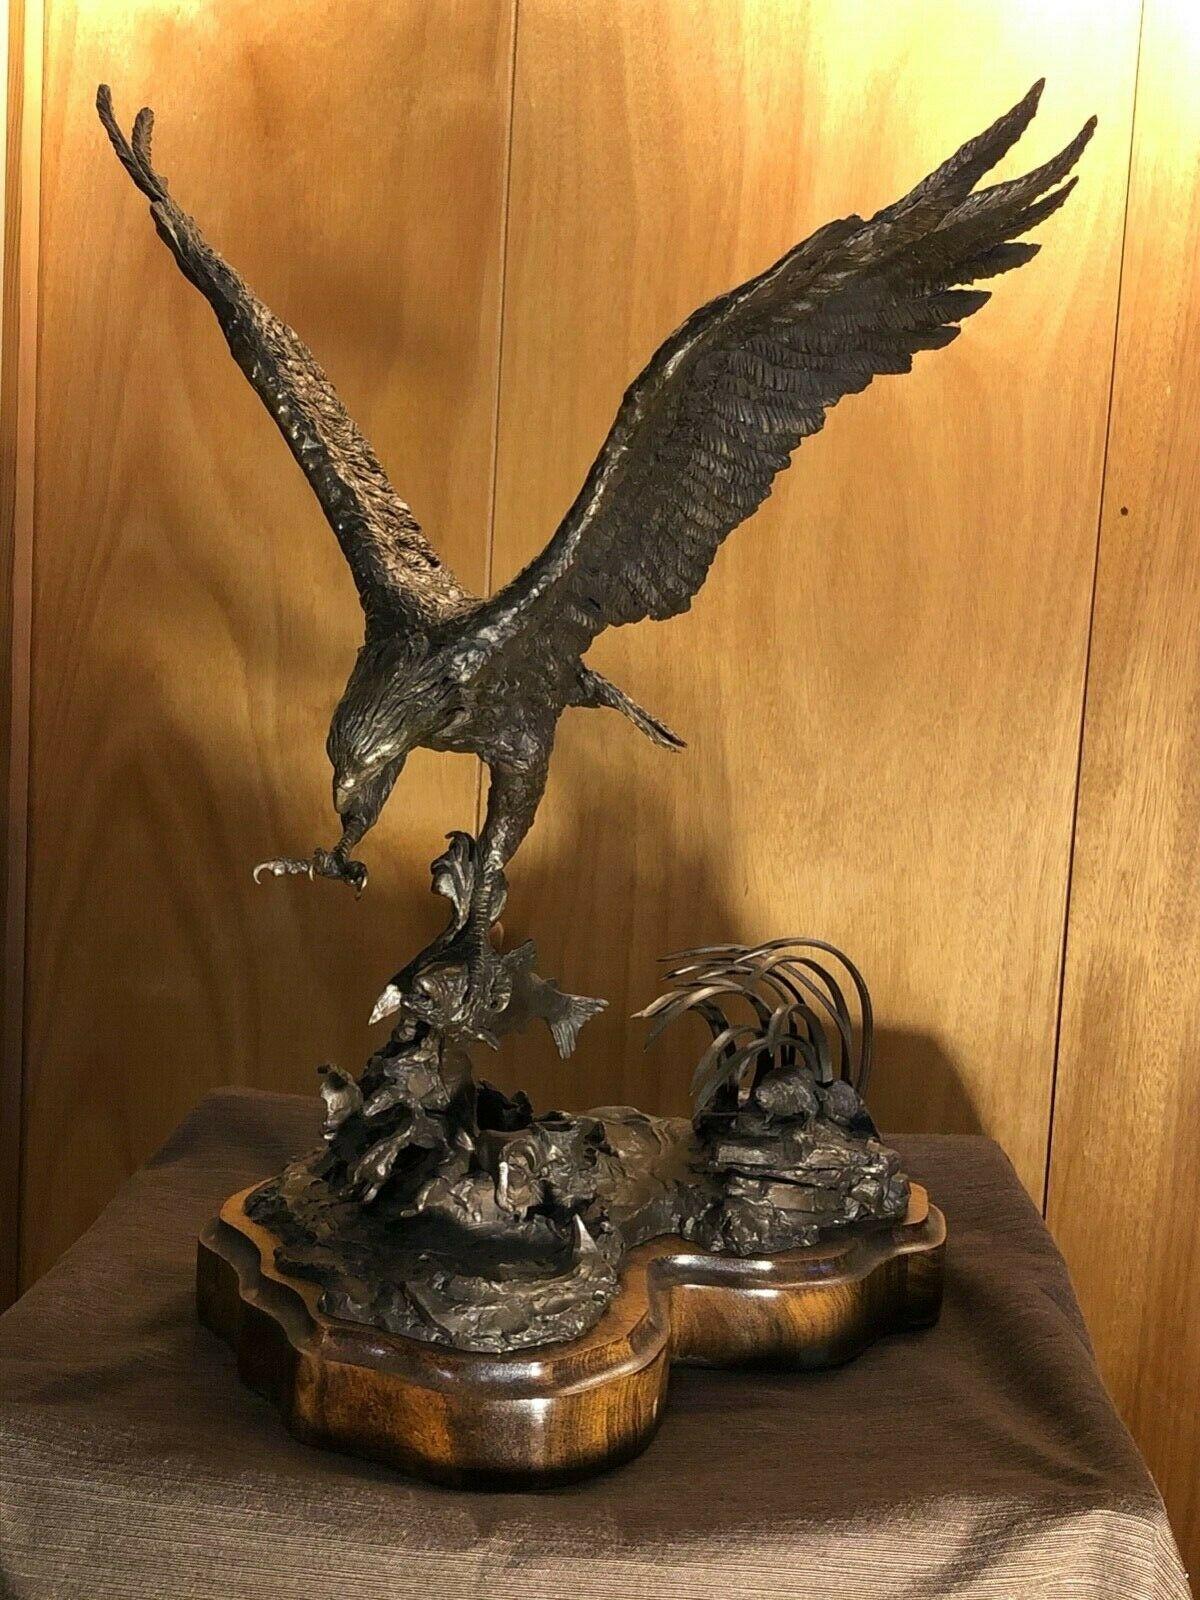 This is a stunning American eagle bronze by deceased American sculptor Lorenzo E. Ghiglieri (Oregon, B 1931, D 2020).

The bronze features a magnificent bald eagle catching a fish while in flight and is inscribed by the artist. dated 1976,